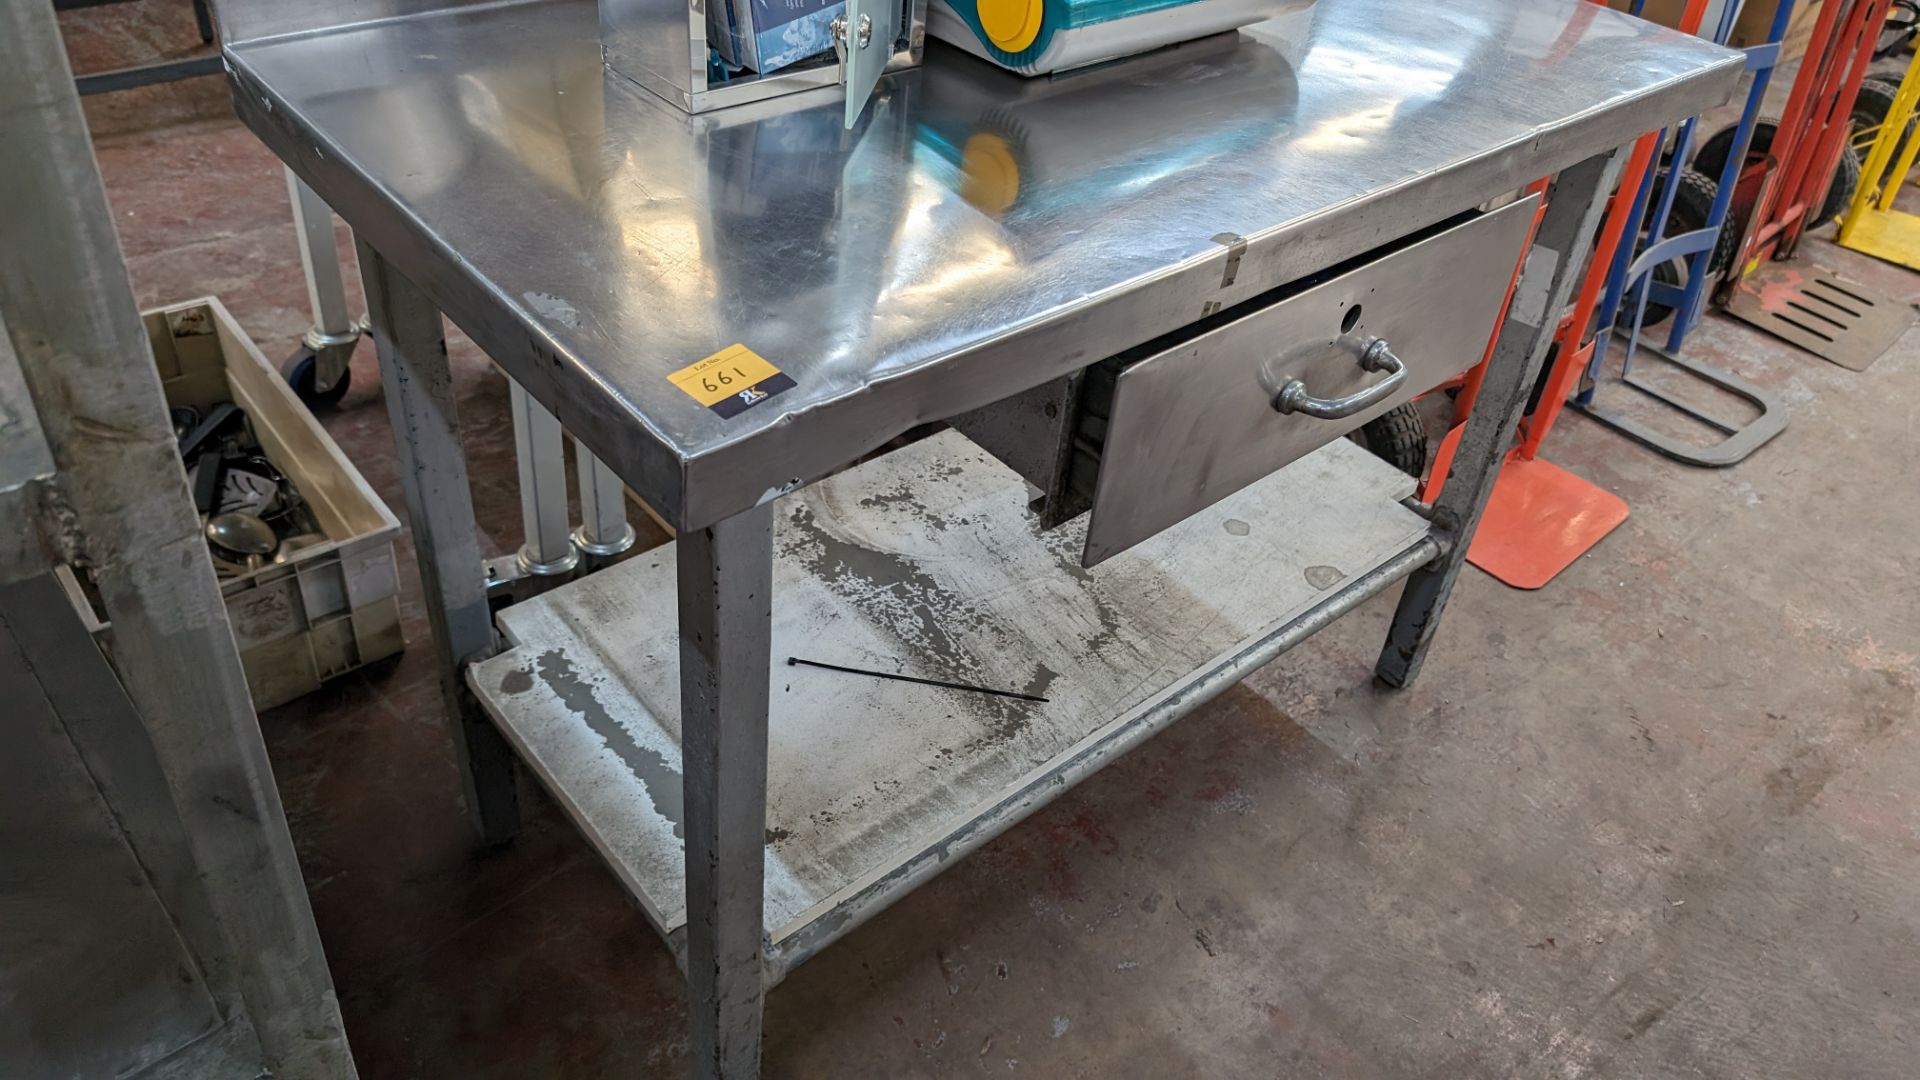 Stainless steel topped table with pull out drawer - Image 2 of 4